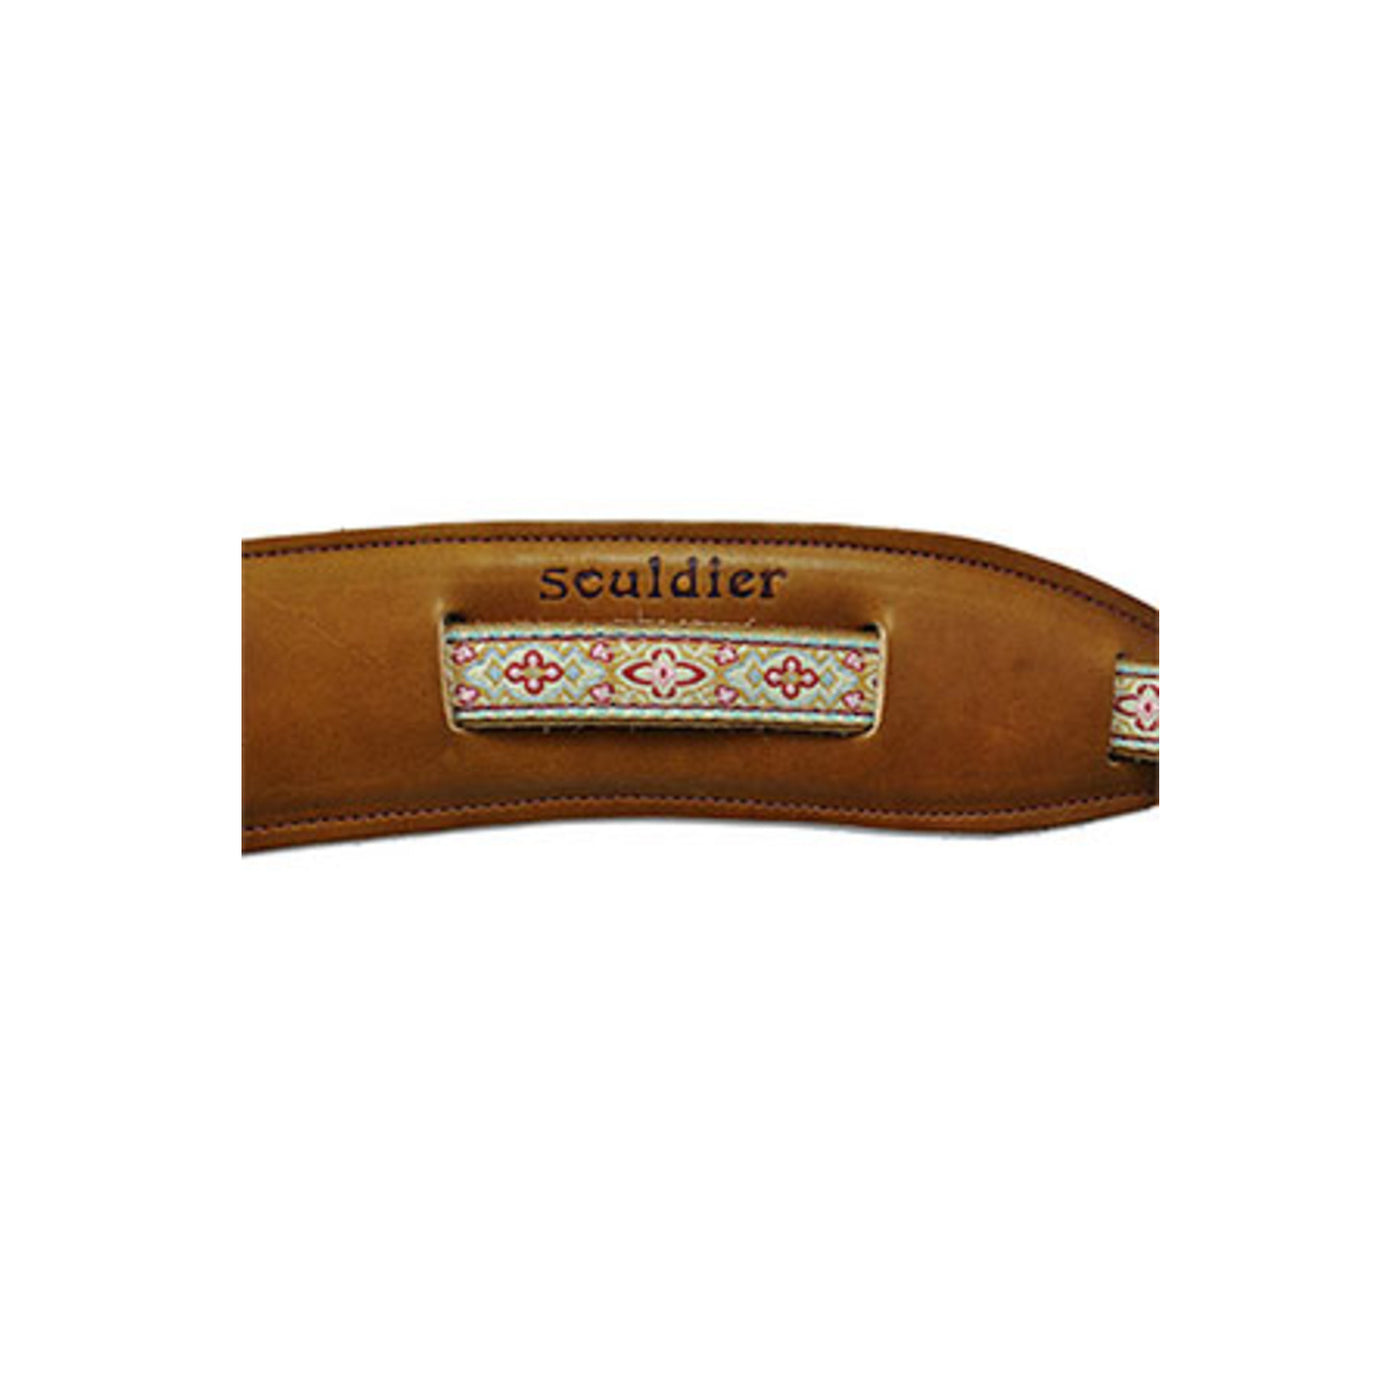 Souldier SSD1058TN01TN - Handmade Souldier Fabric Saddle Strap for Bass Electric, or Acoustic Guitar, 2.5 Inches Wide and Adjustable up to 57" made in the USA, Anouk